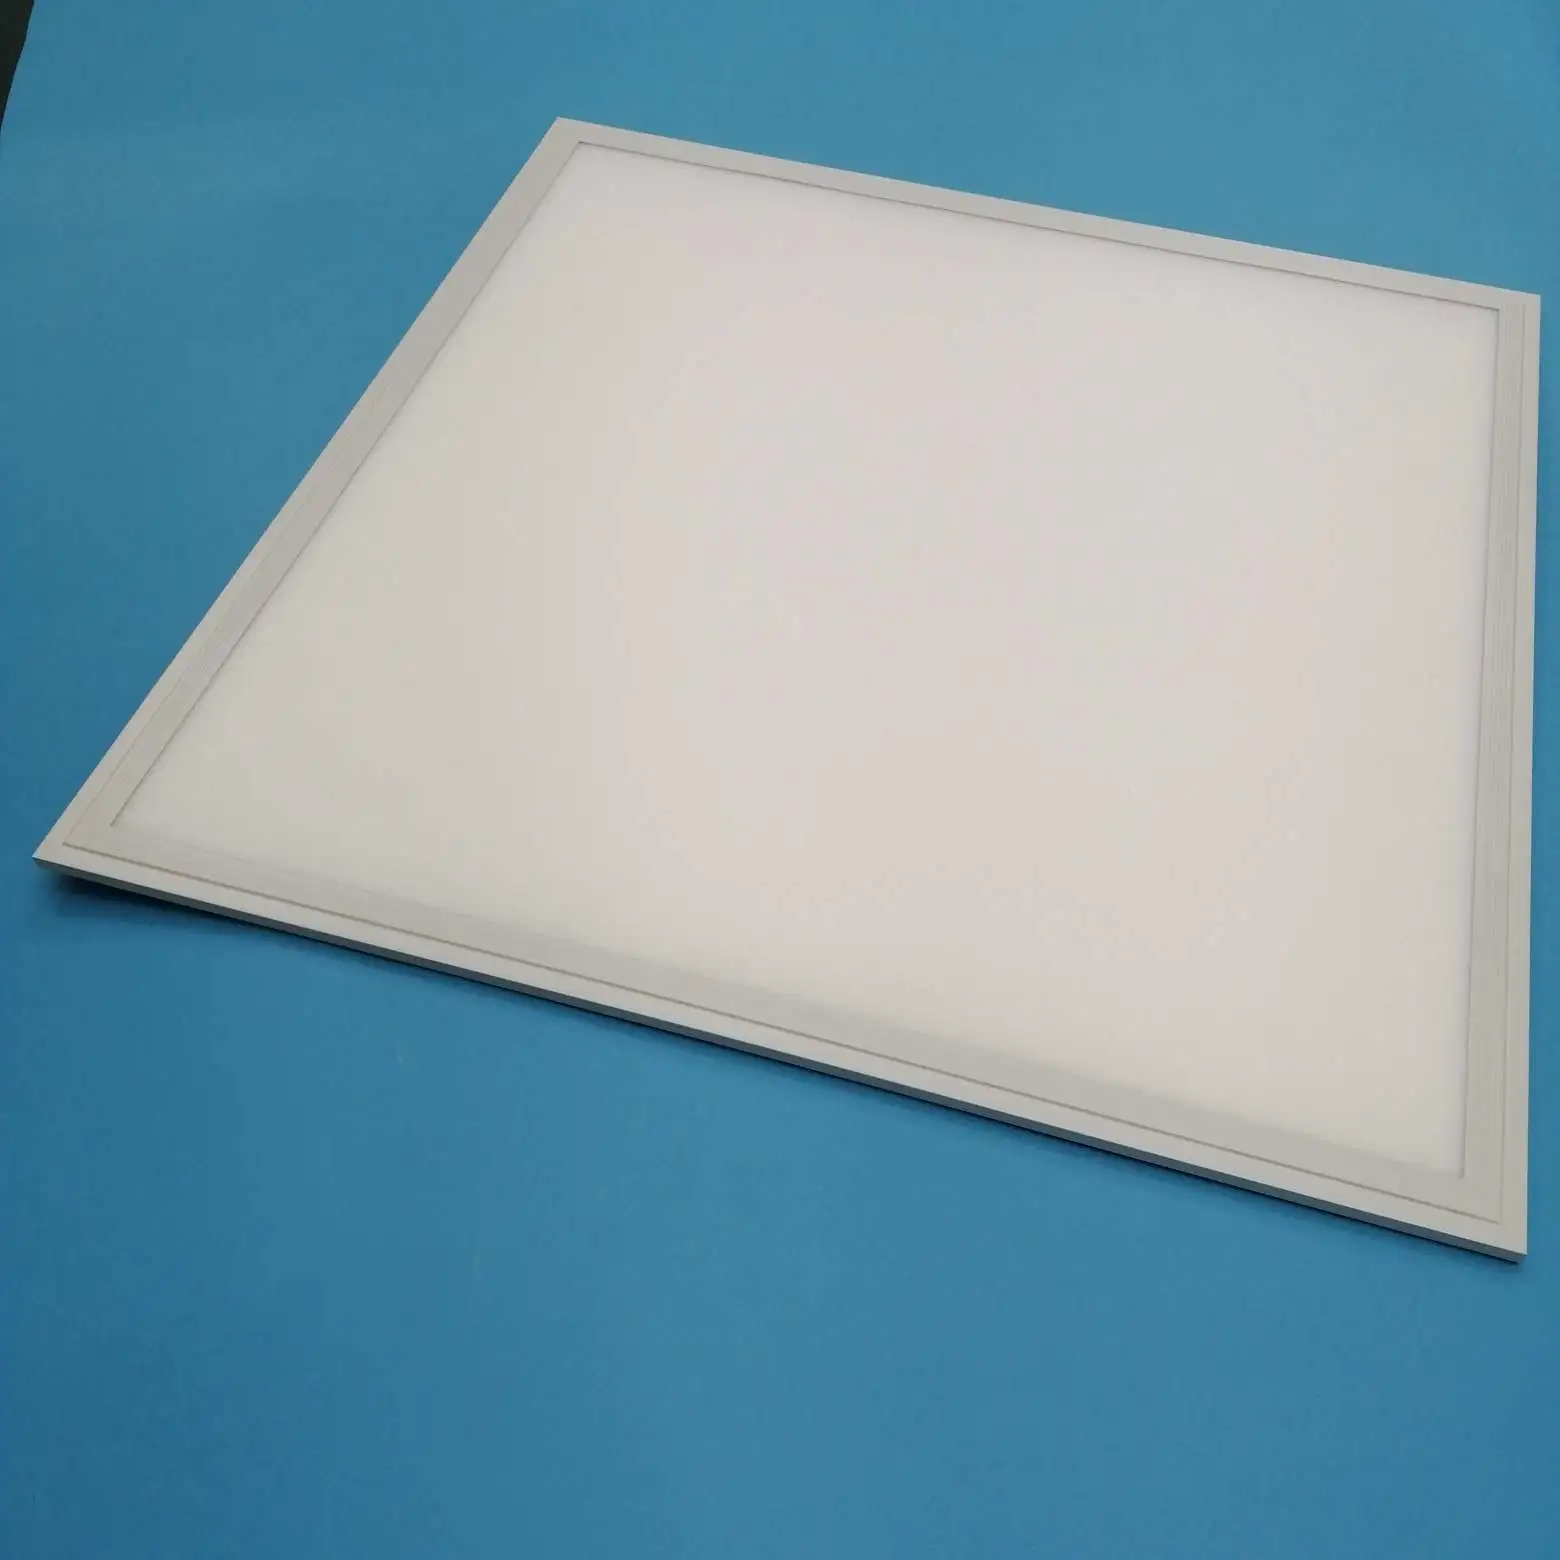 wholesale flicker free driver 40w 4000k 60x60cm led panel light ceiling with frame